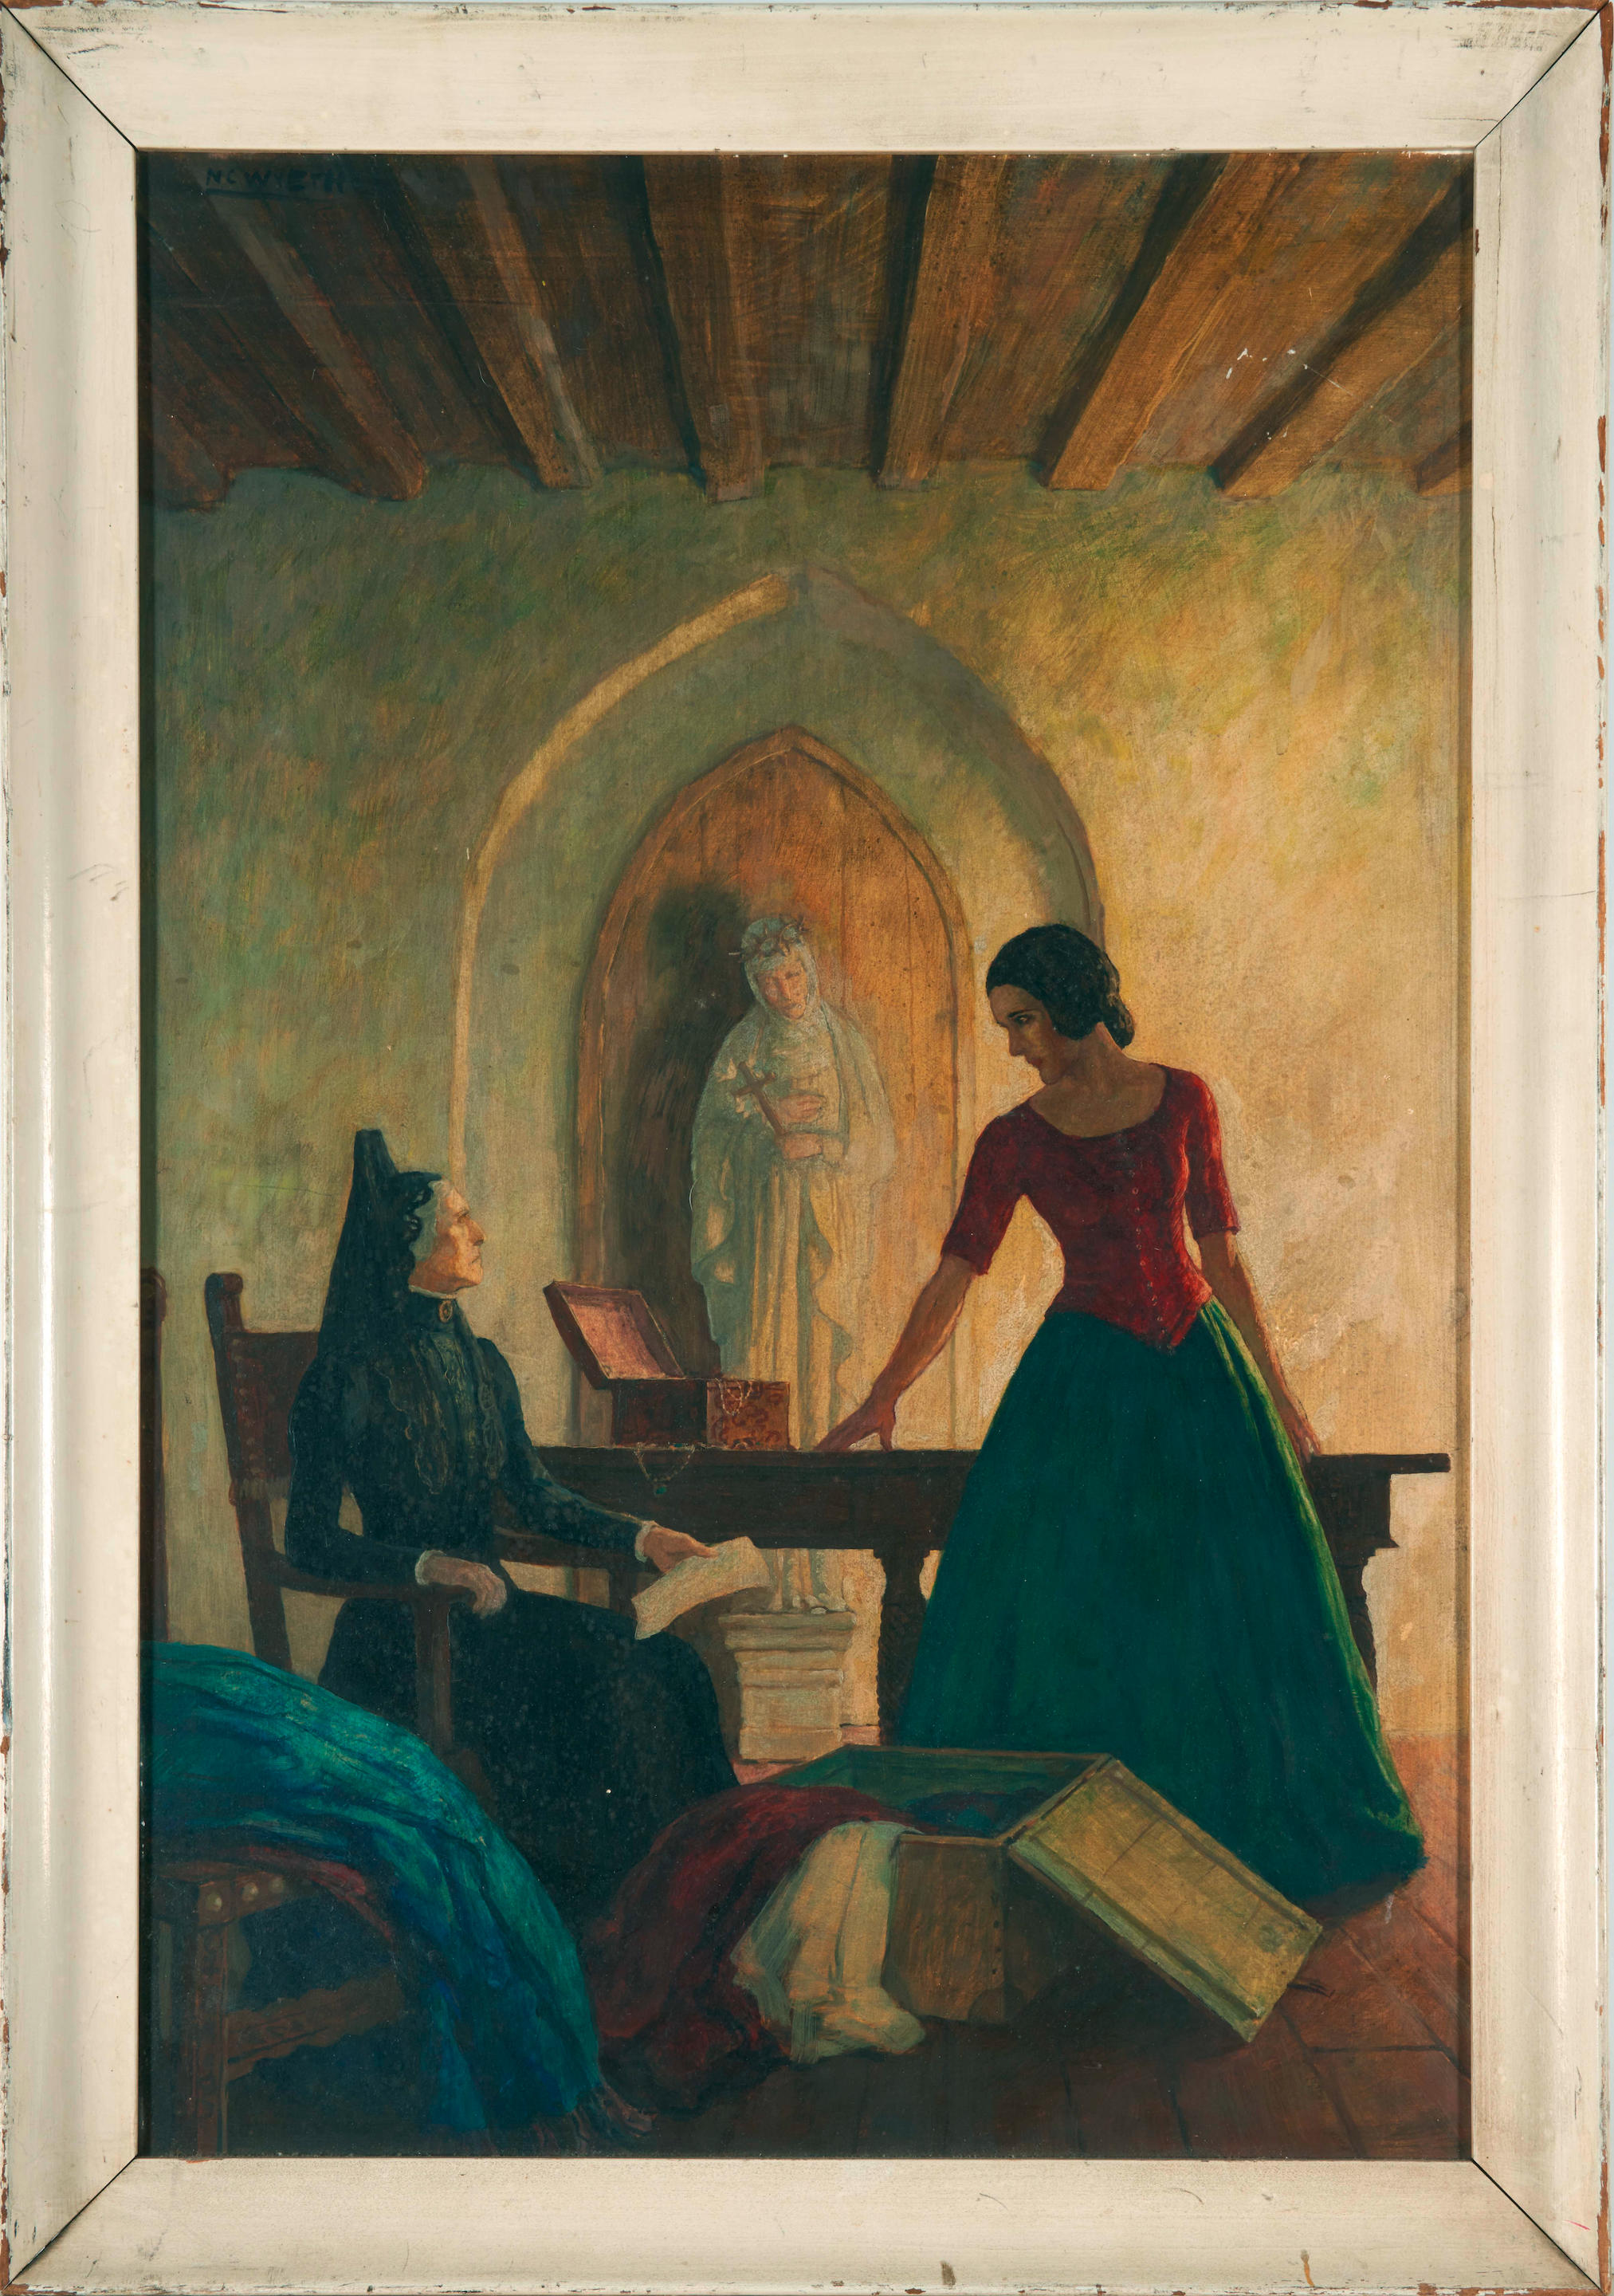 A painting of an old woman in a black dress sitting at a table, looking at a young woman in a red and green dress